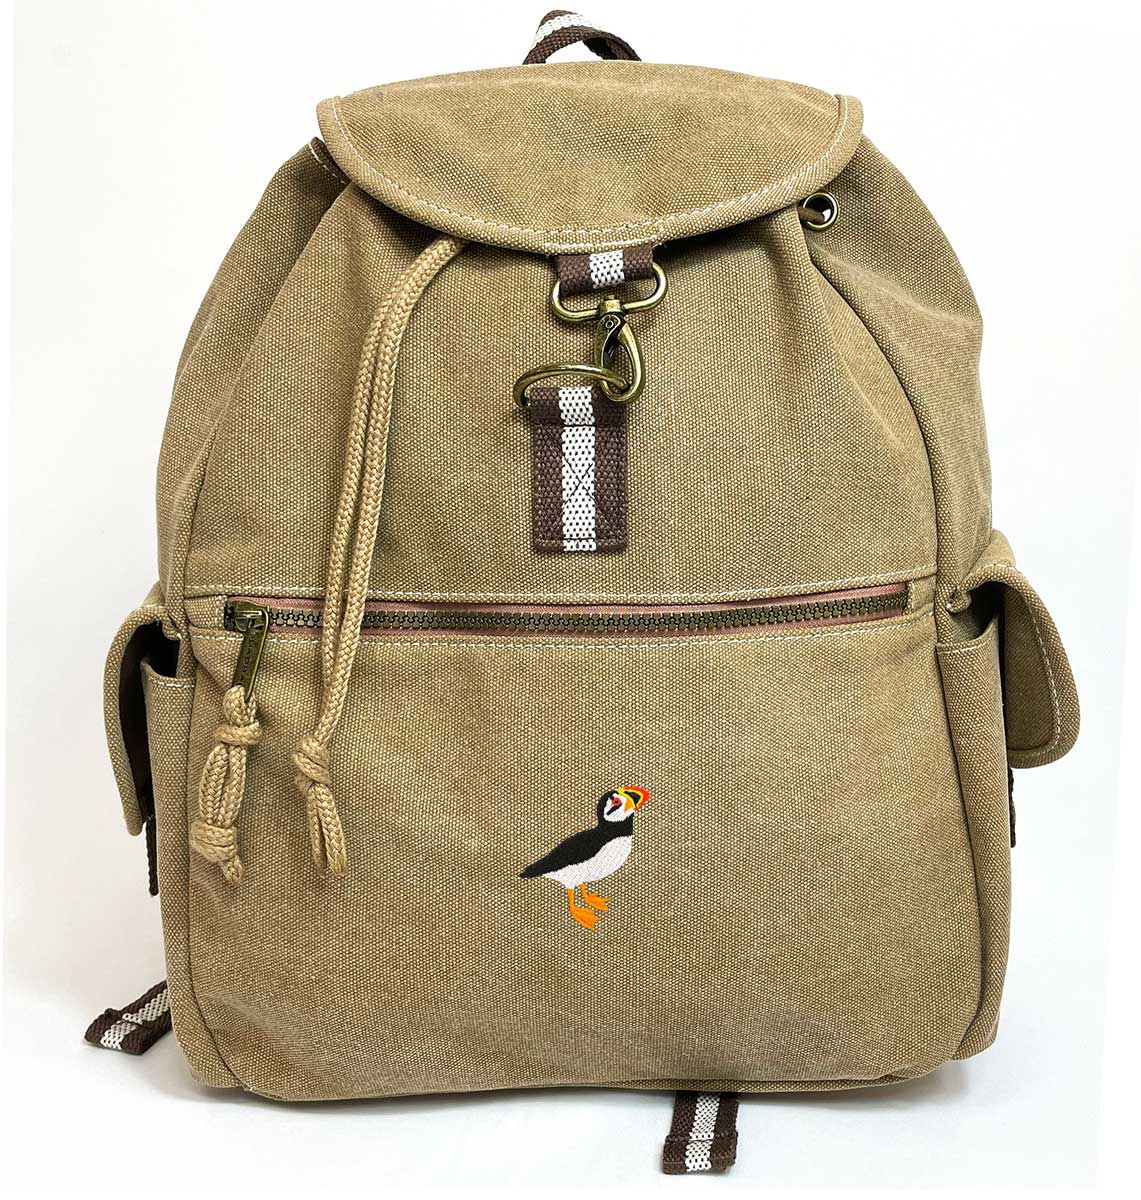 Puffin Vintage Canvas Backpack - Blue Panda